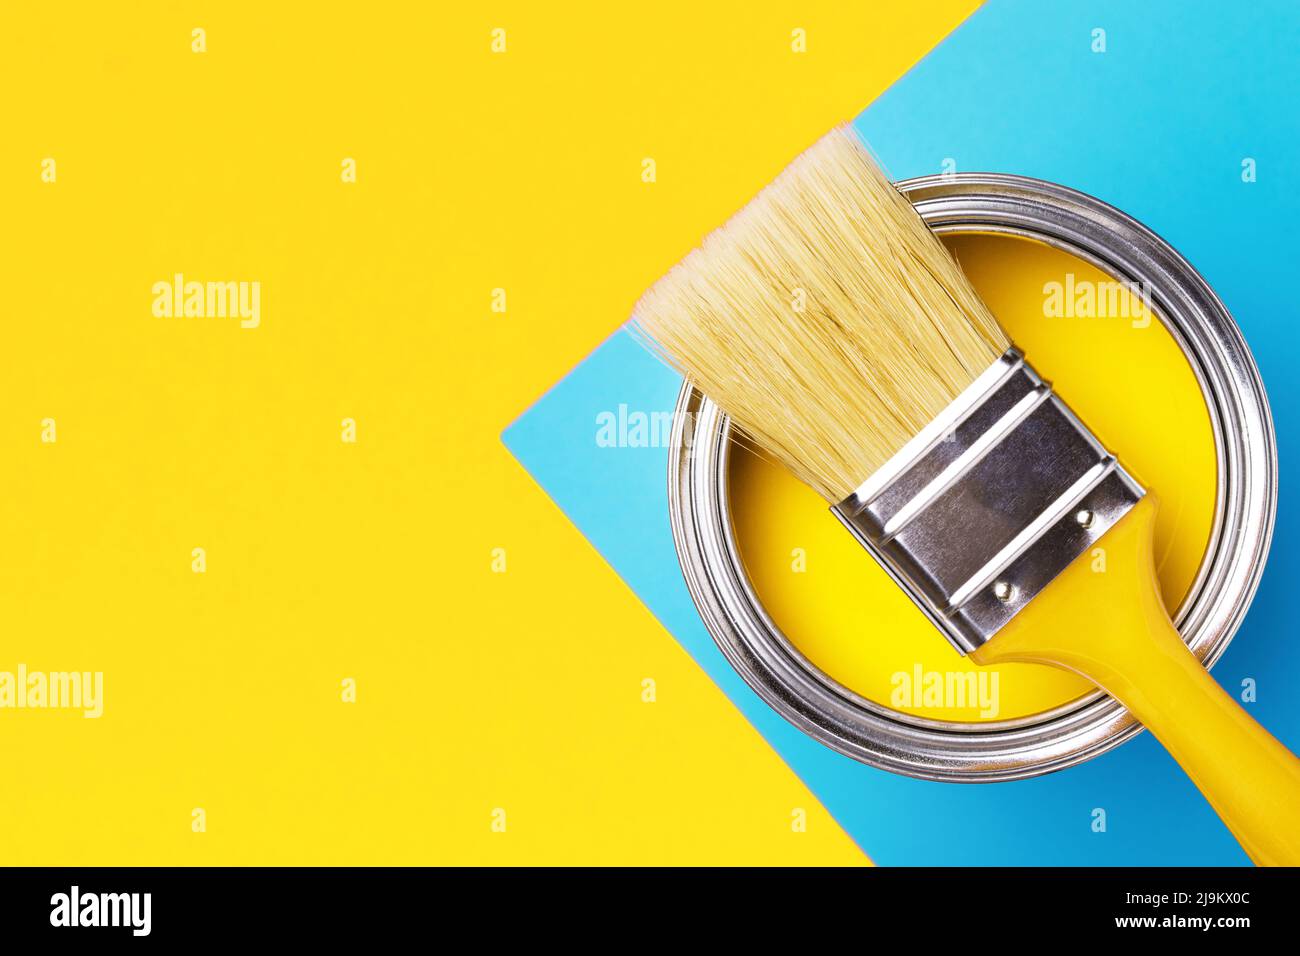 Can of yellow paint with brush on yellow and blue background. Top view, redecorating concept. Stock Photo